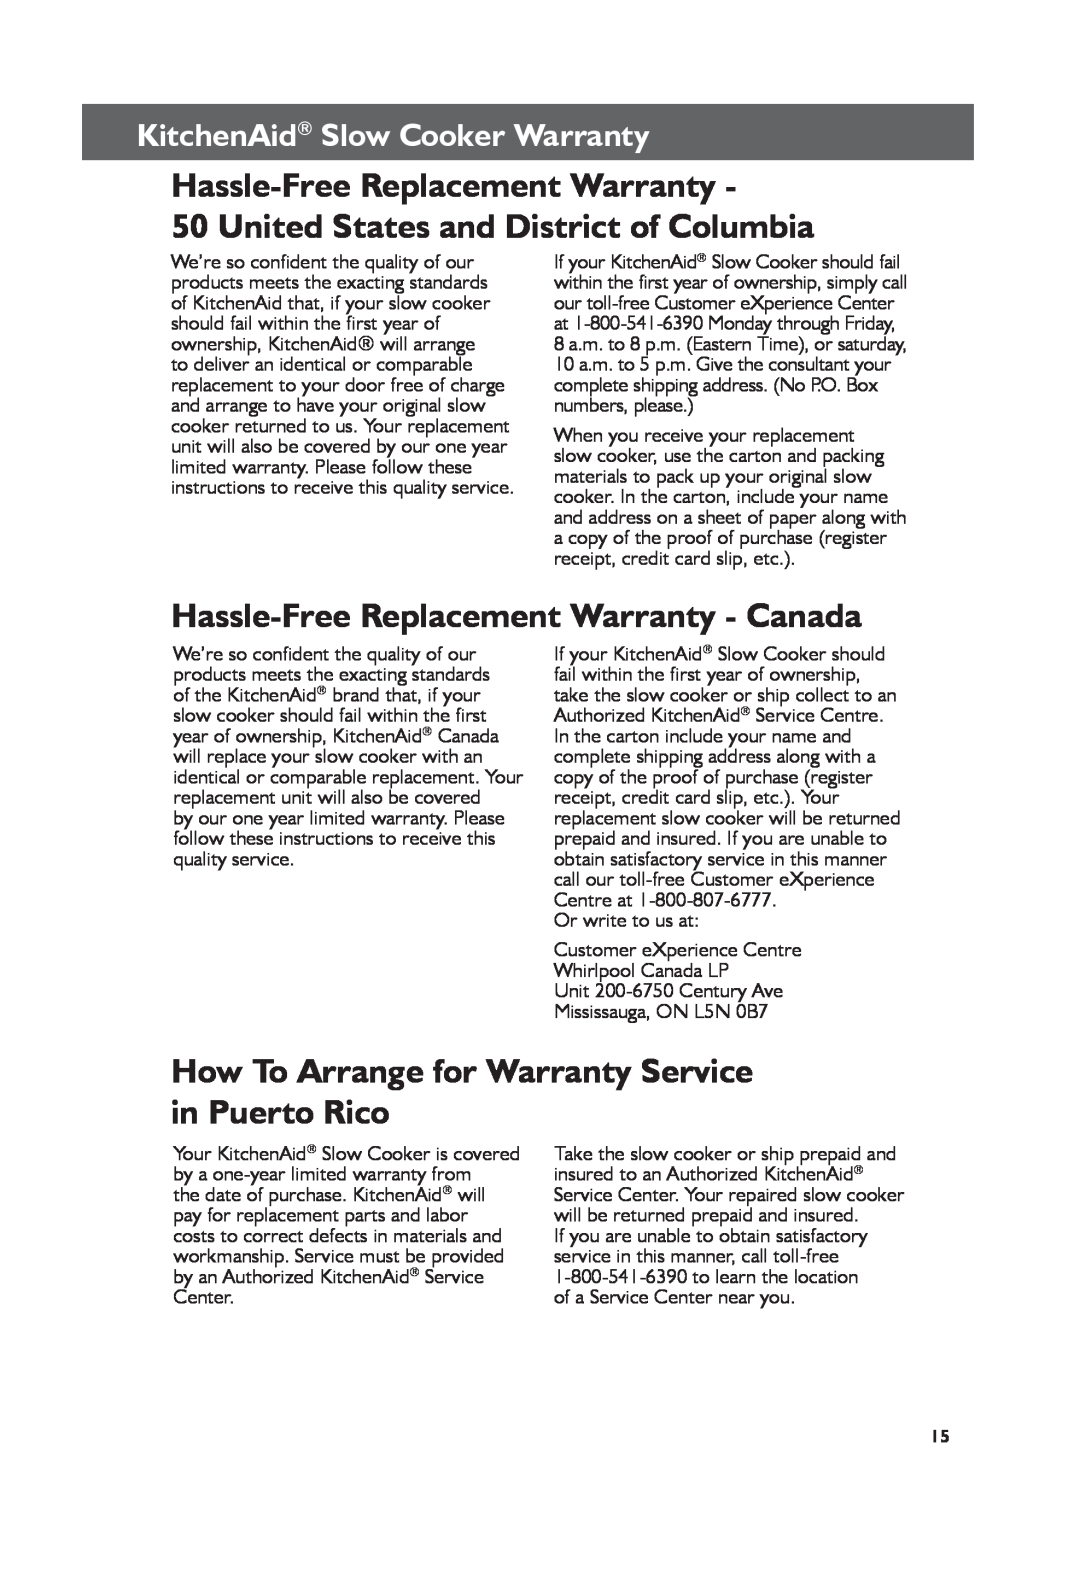 KitchenAid KSC6223, KSC6222 manual Hassle-Free Replacement Warranty, United States and District of Columbia 